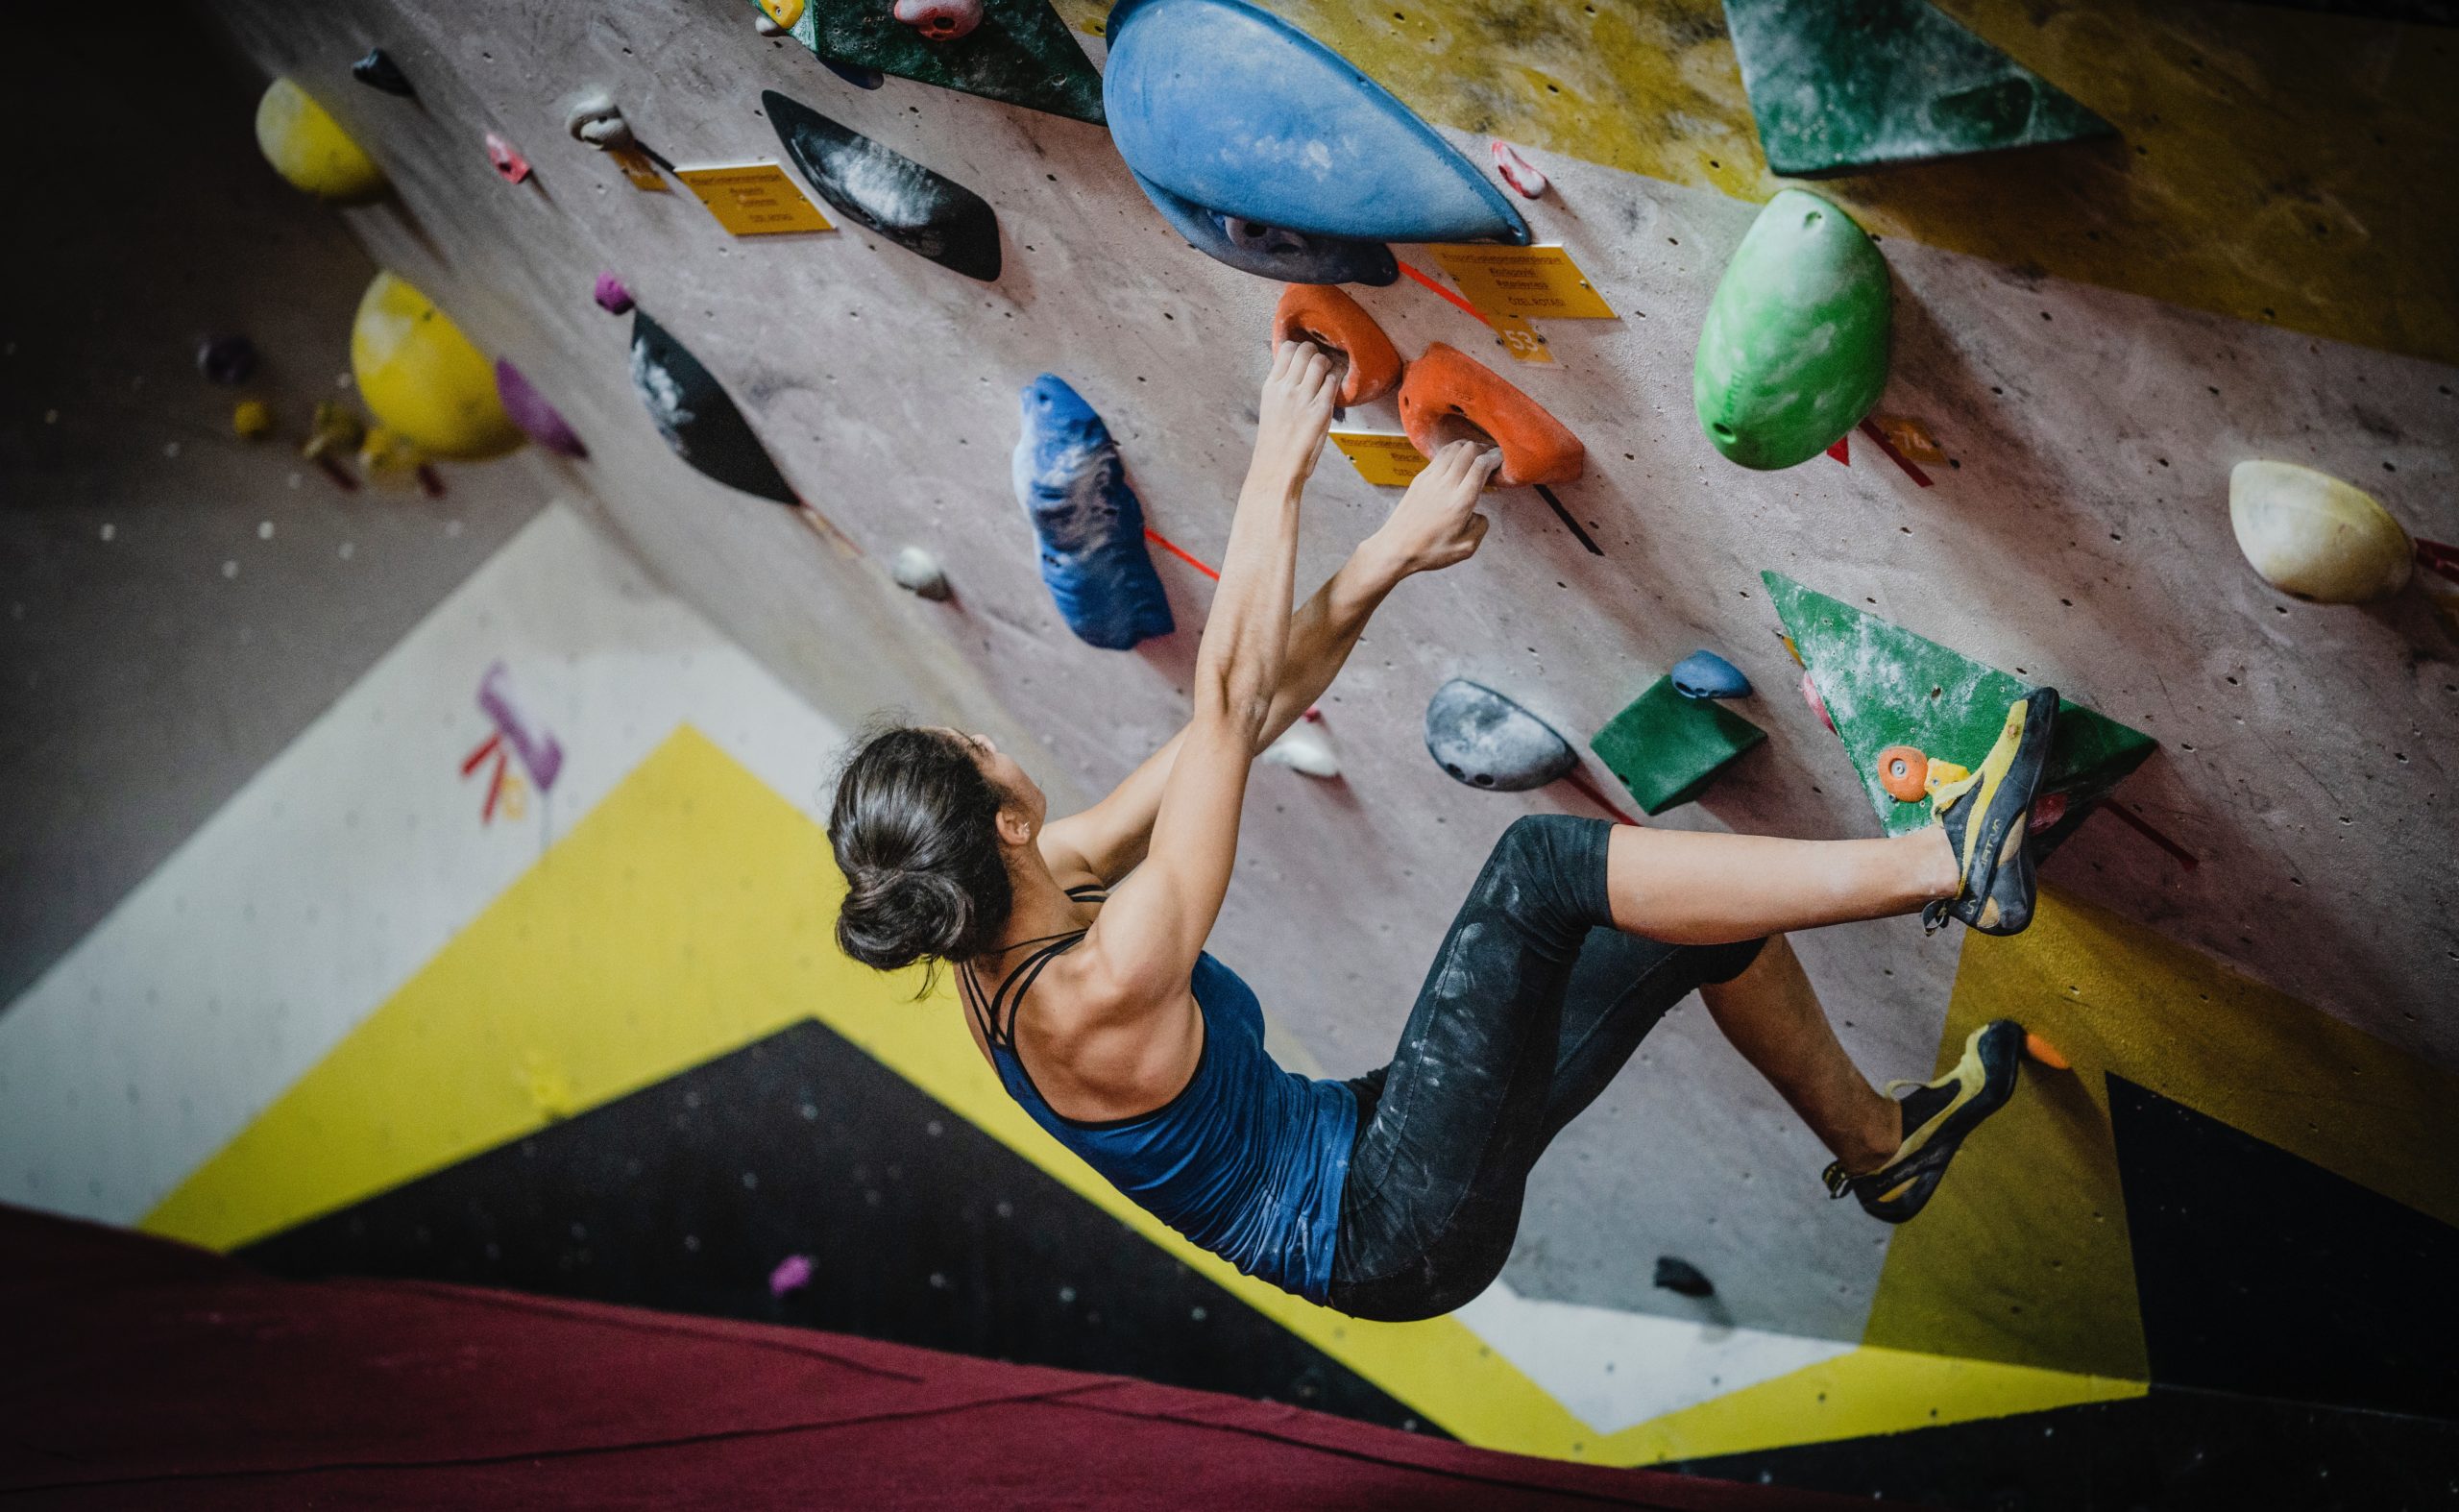 A woman bouldering inside at a gym